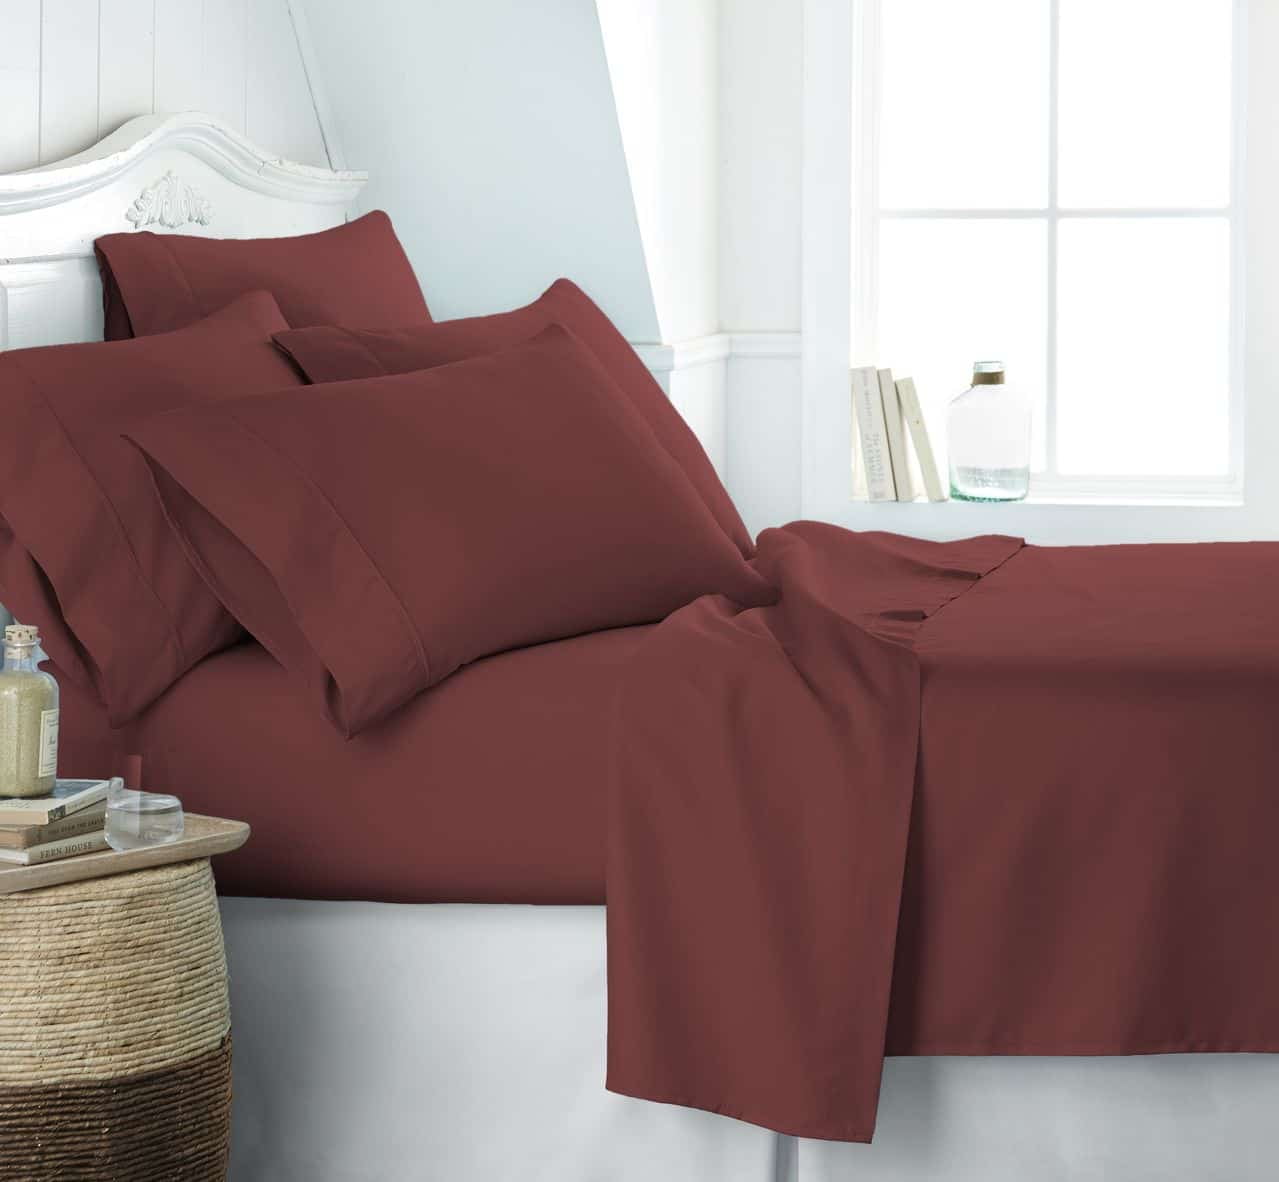 Oake Bedding Camel NEW $70 SOLID 500TC Twin Fitted Sheet